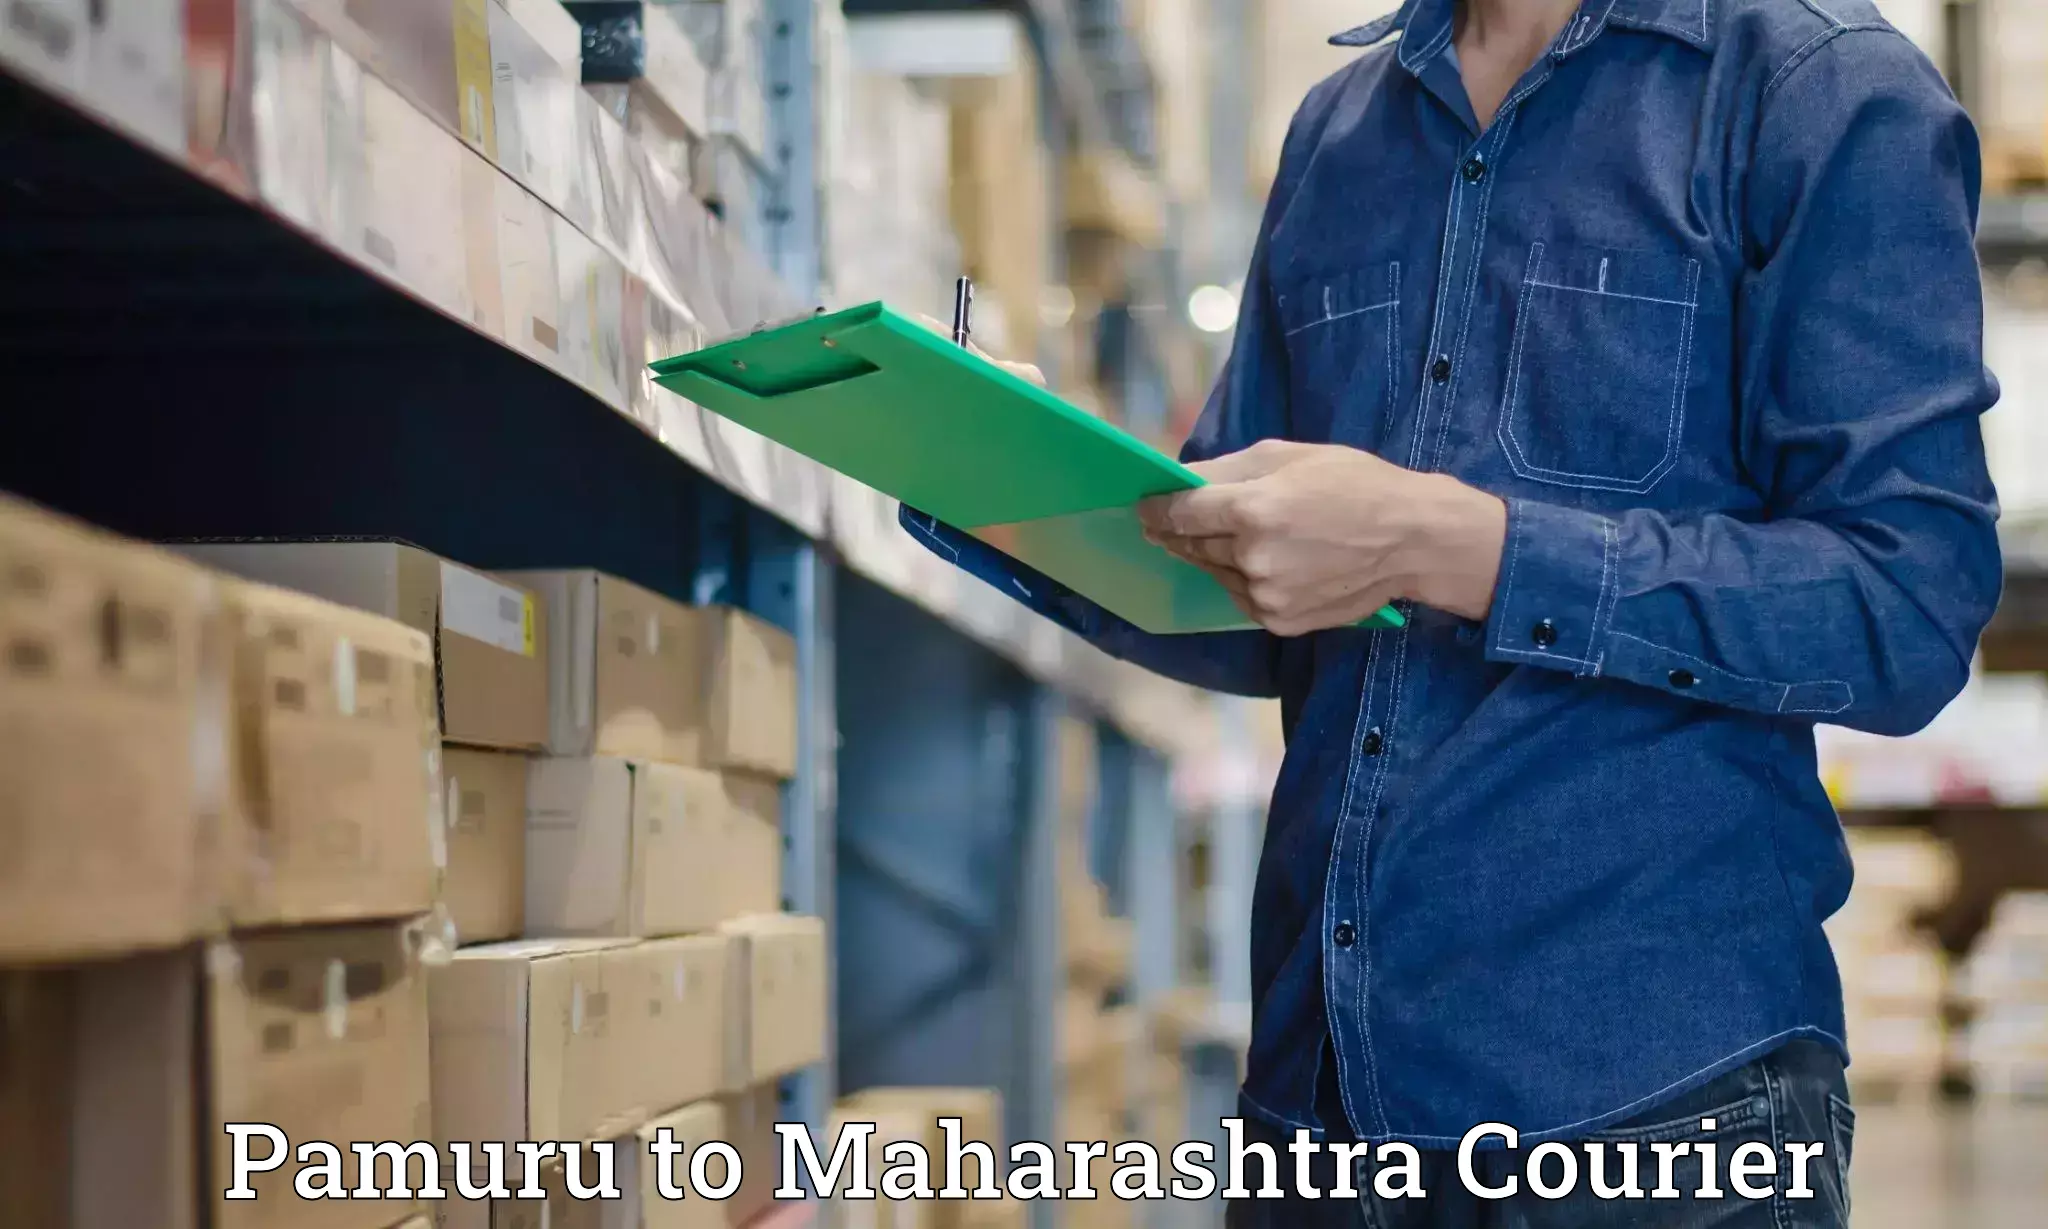 Courier service innovation in Pamuru to Pune